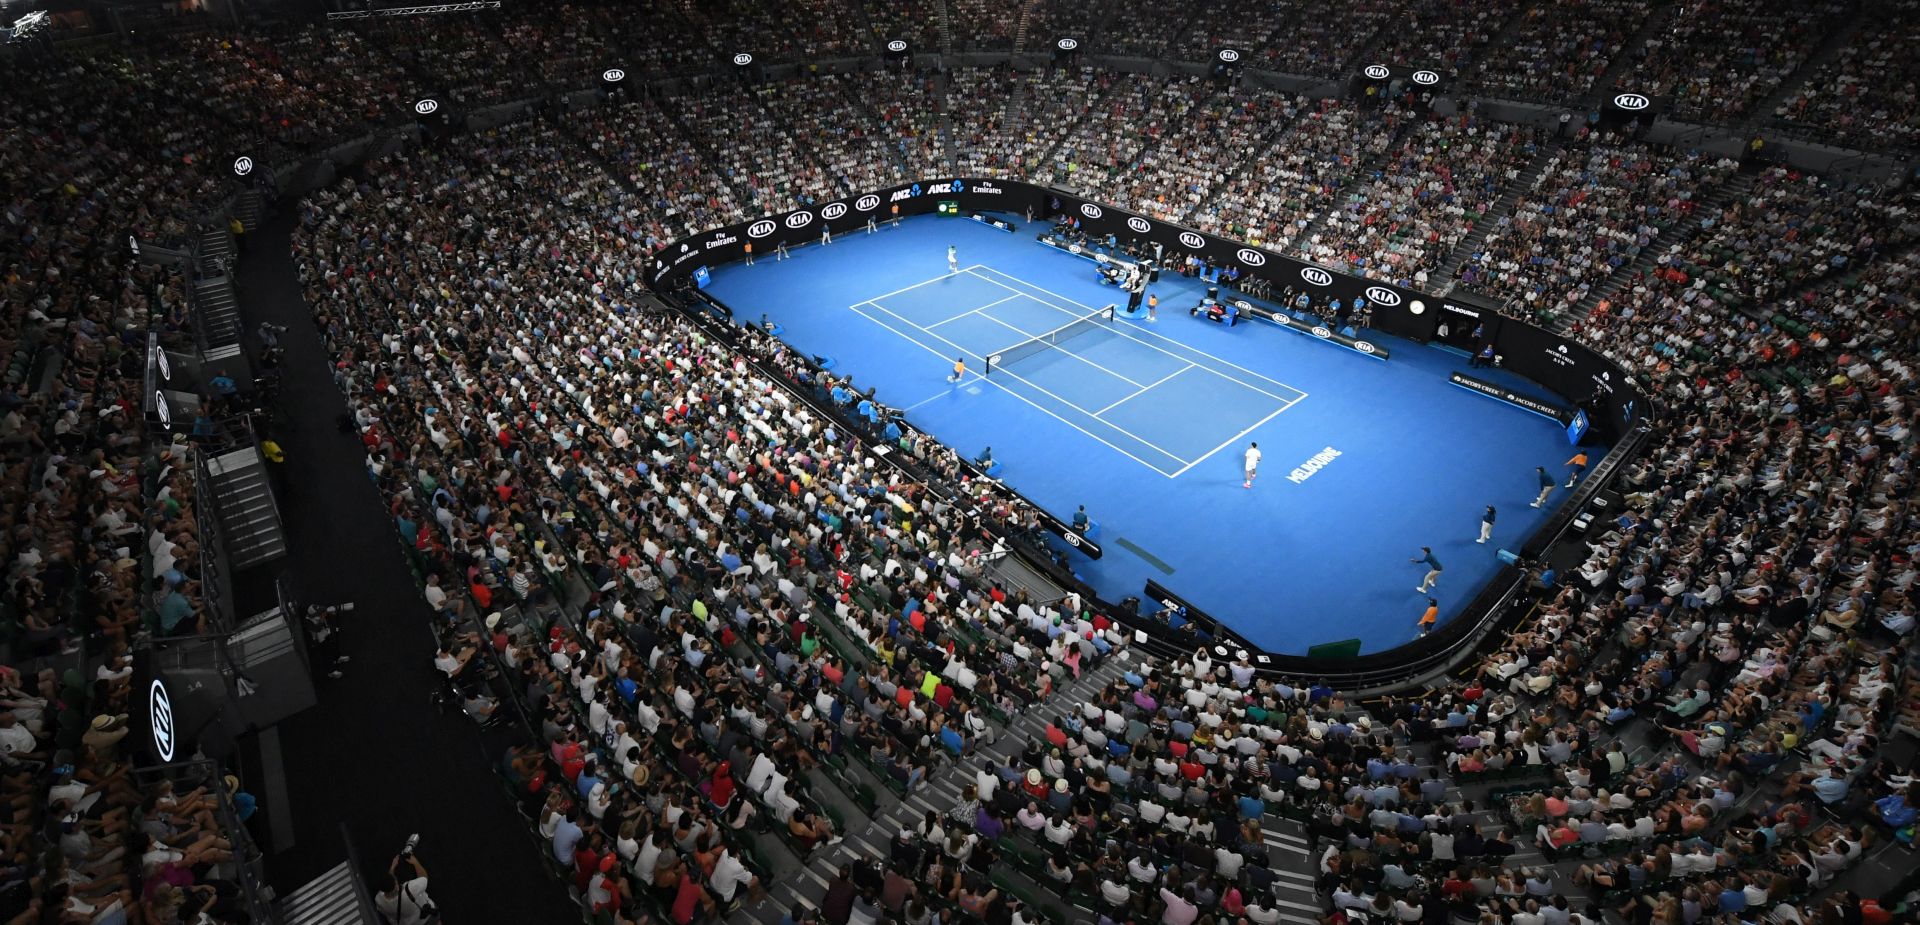 epa06480047 General view of Rod Laver Arena with the roof closed during play between Marin Cilic of Croatia against Roger Federer of Switzerland during the mens final on day fourteen of the Australian Open tennis tournament, in Melbourne, Australia, 28 January 2018.  EPA/JULIAN SMITH AUSTRALIA AND NEW ZEALAND OUT